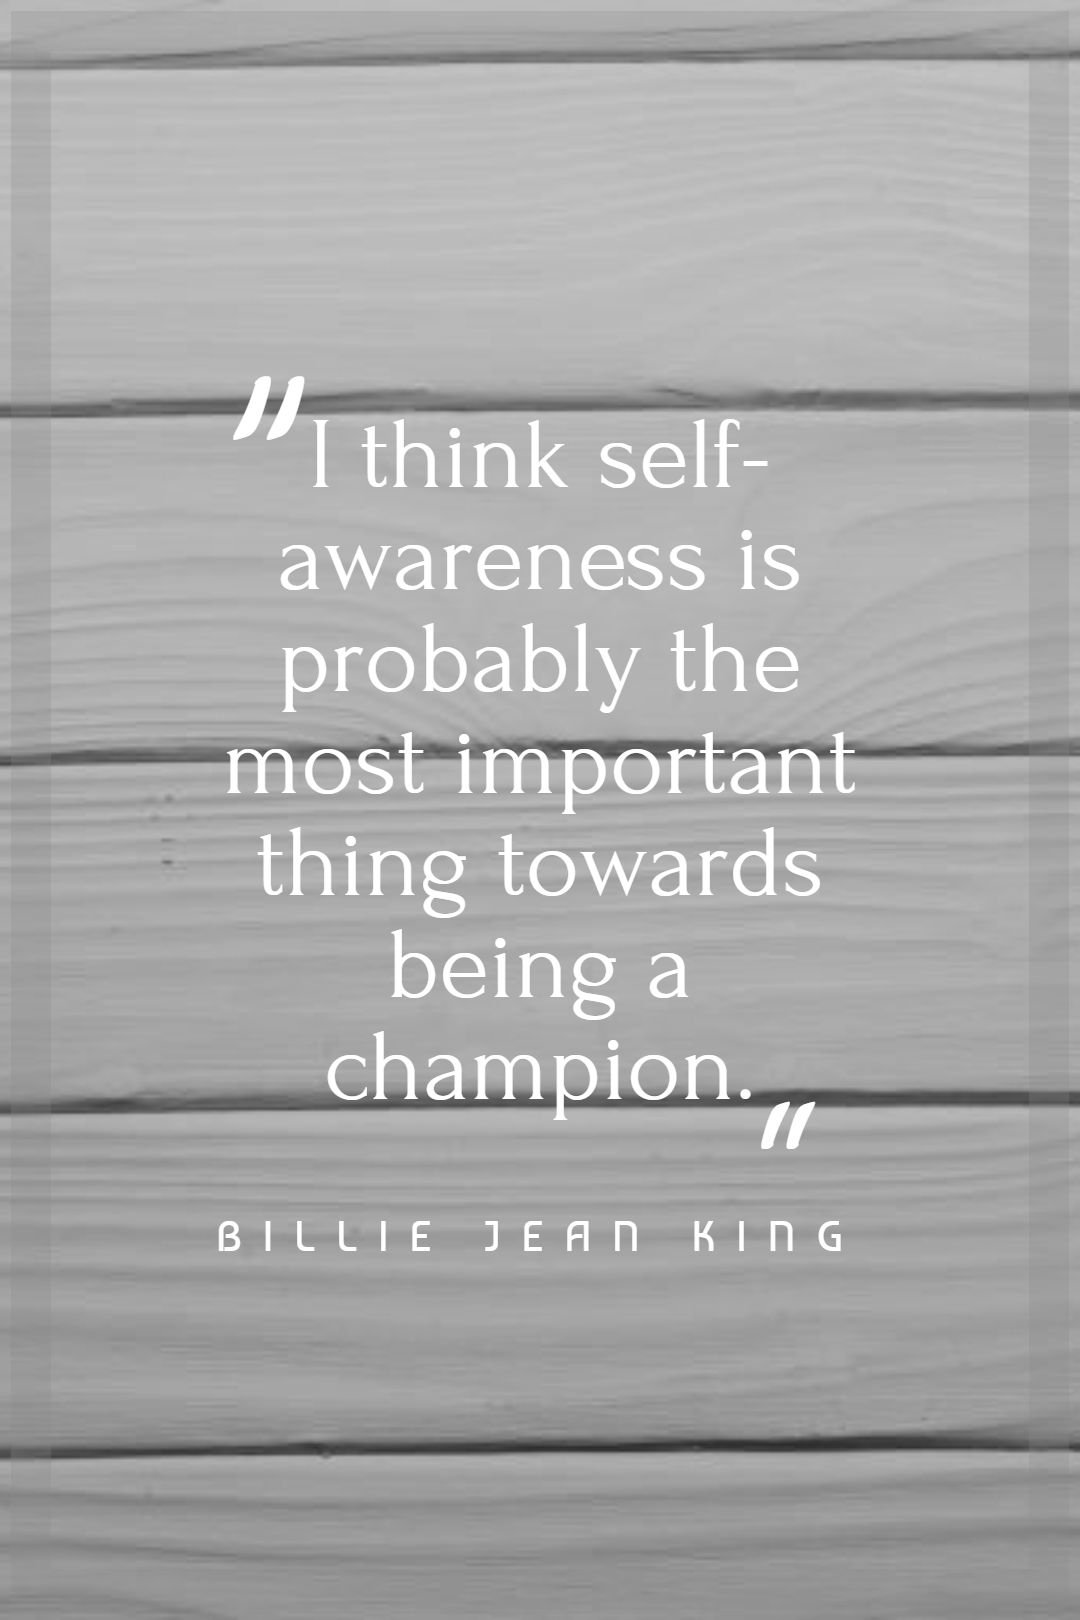 I think self awareness is probably the most important thing towards being a champion.